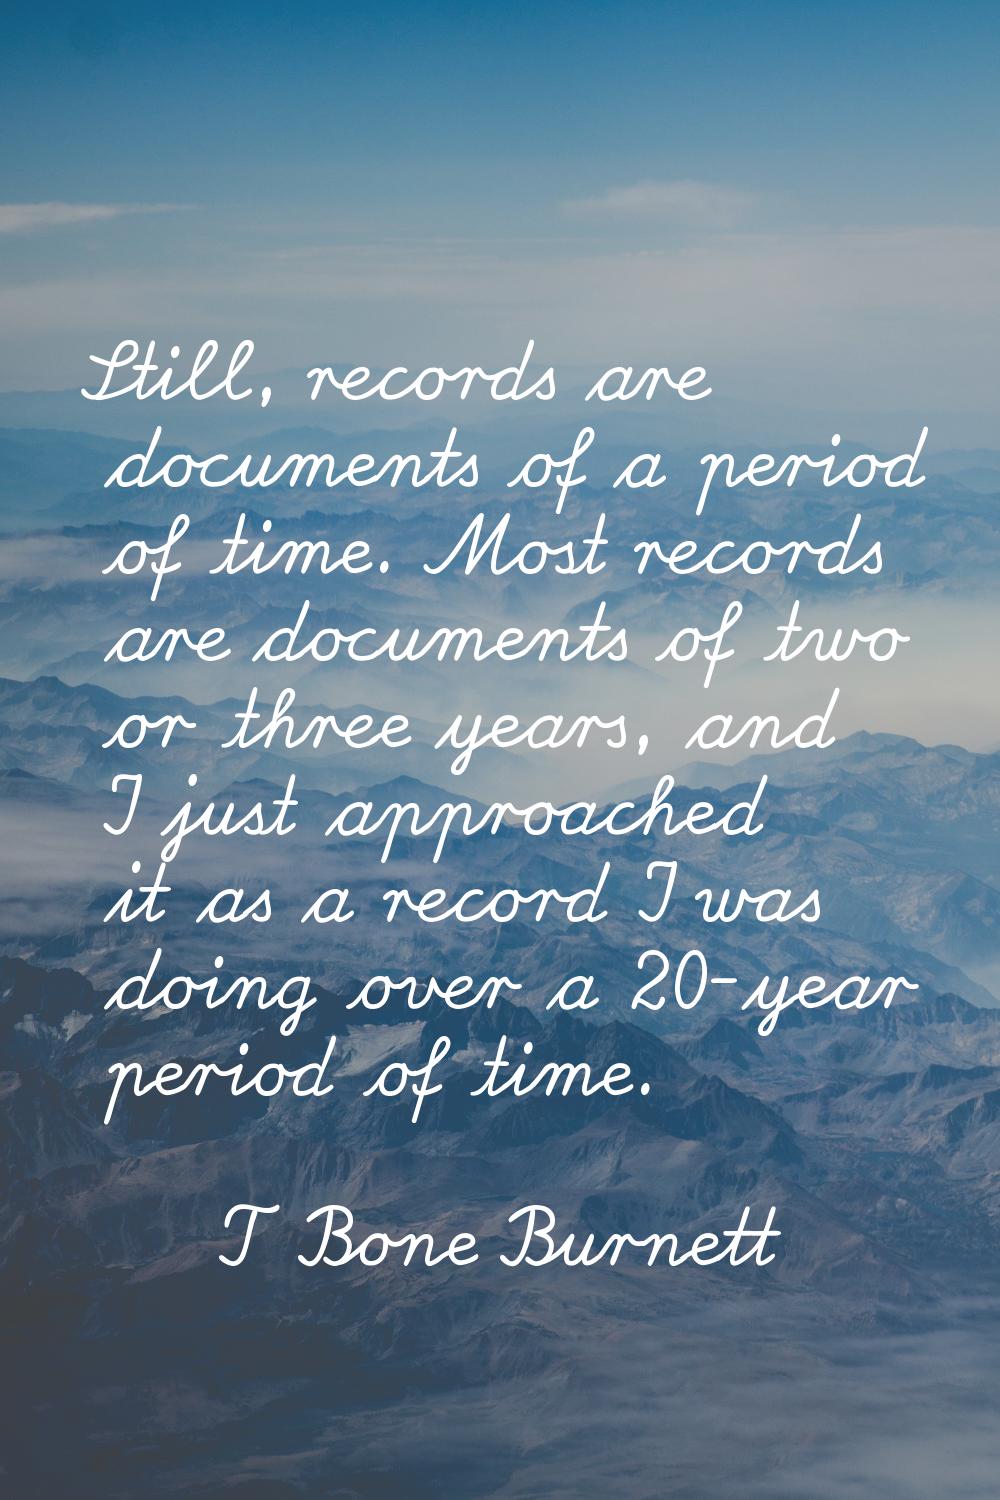 Still, records are documents of a period of time. Most records are documents of two or three years,